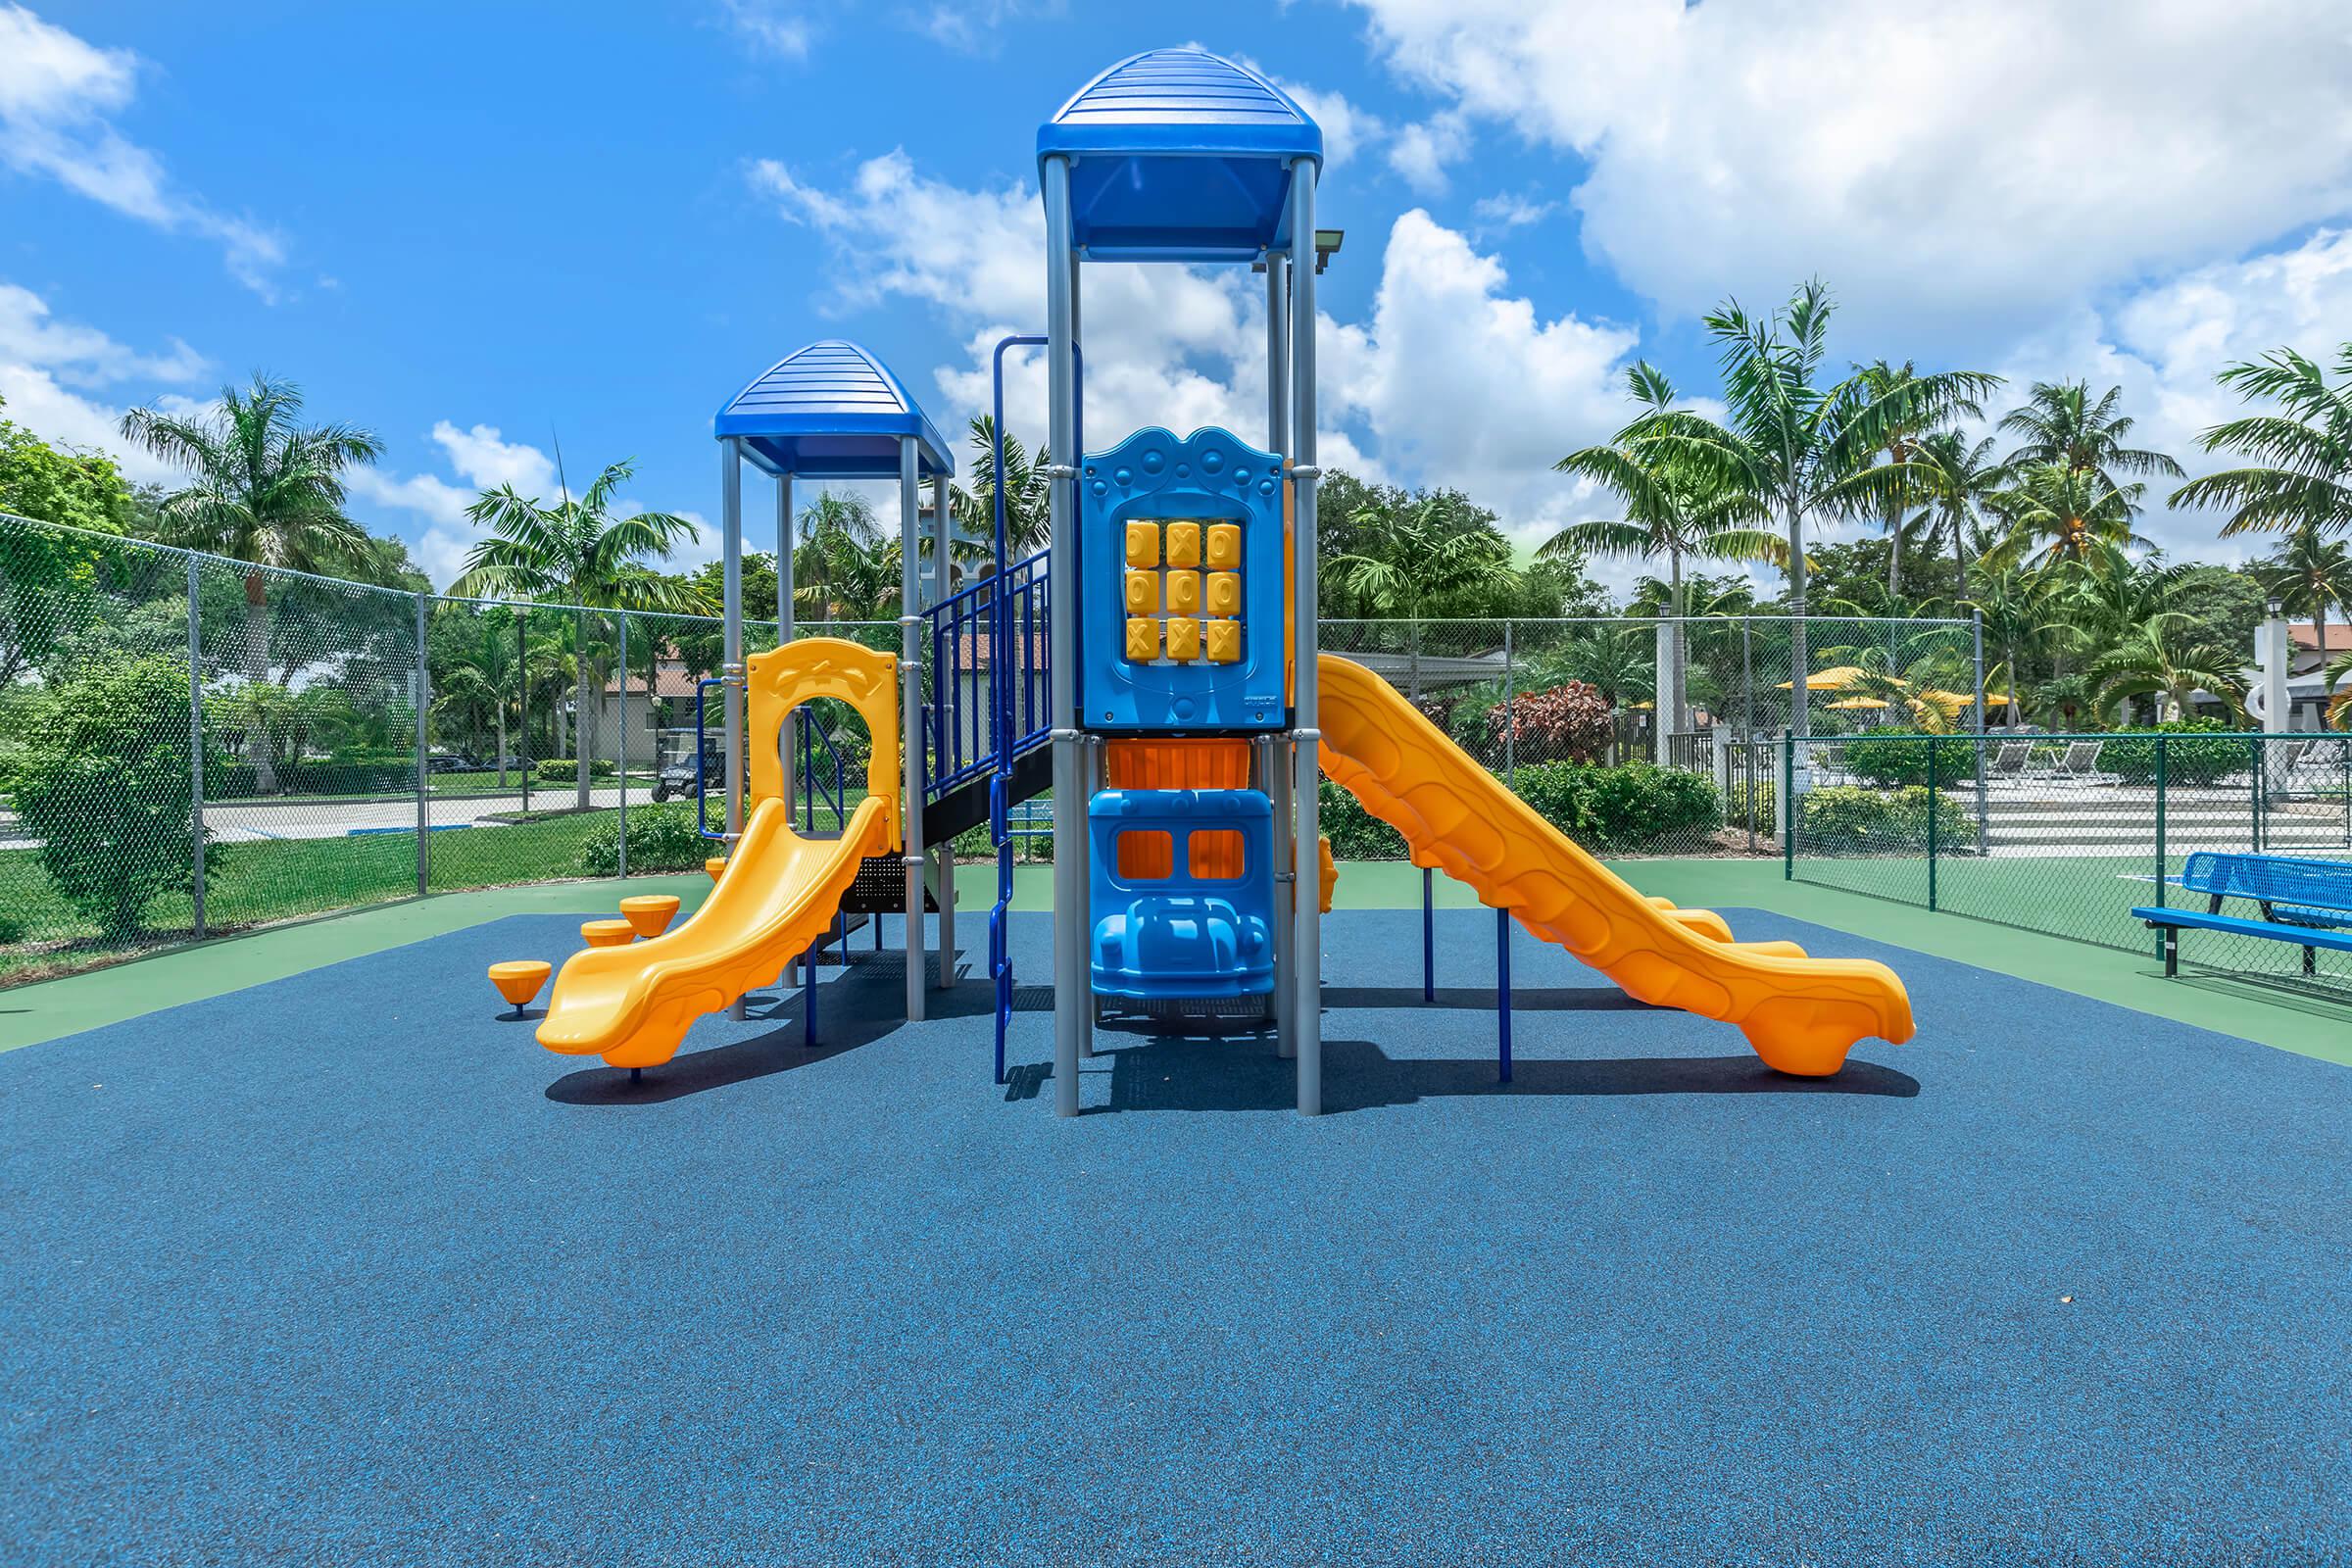 CHILDREN WILL LOVE THE PLAY AREA